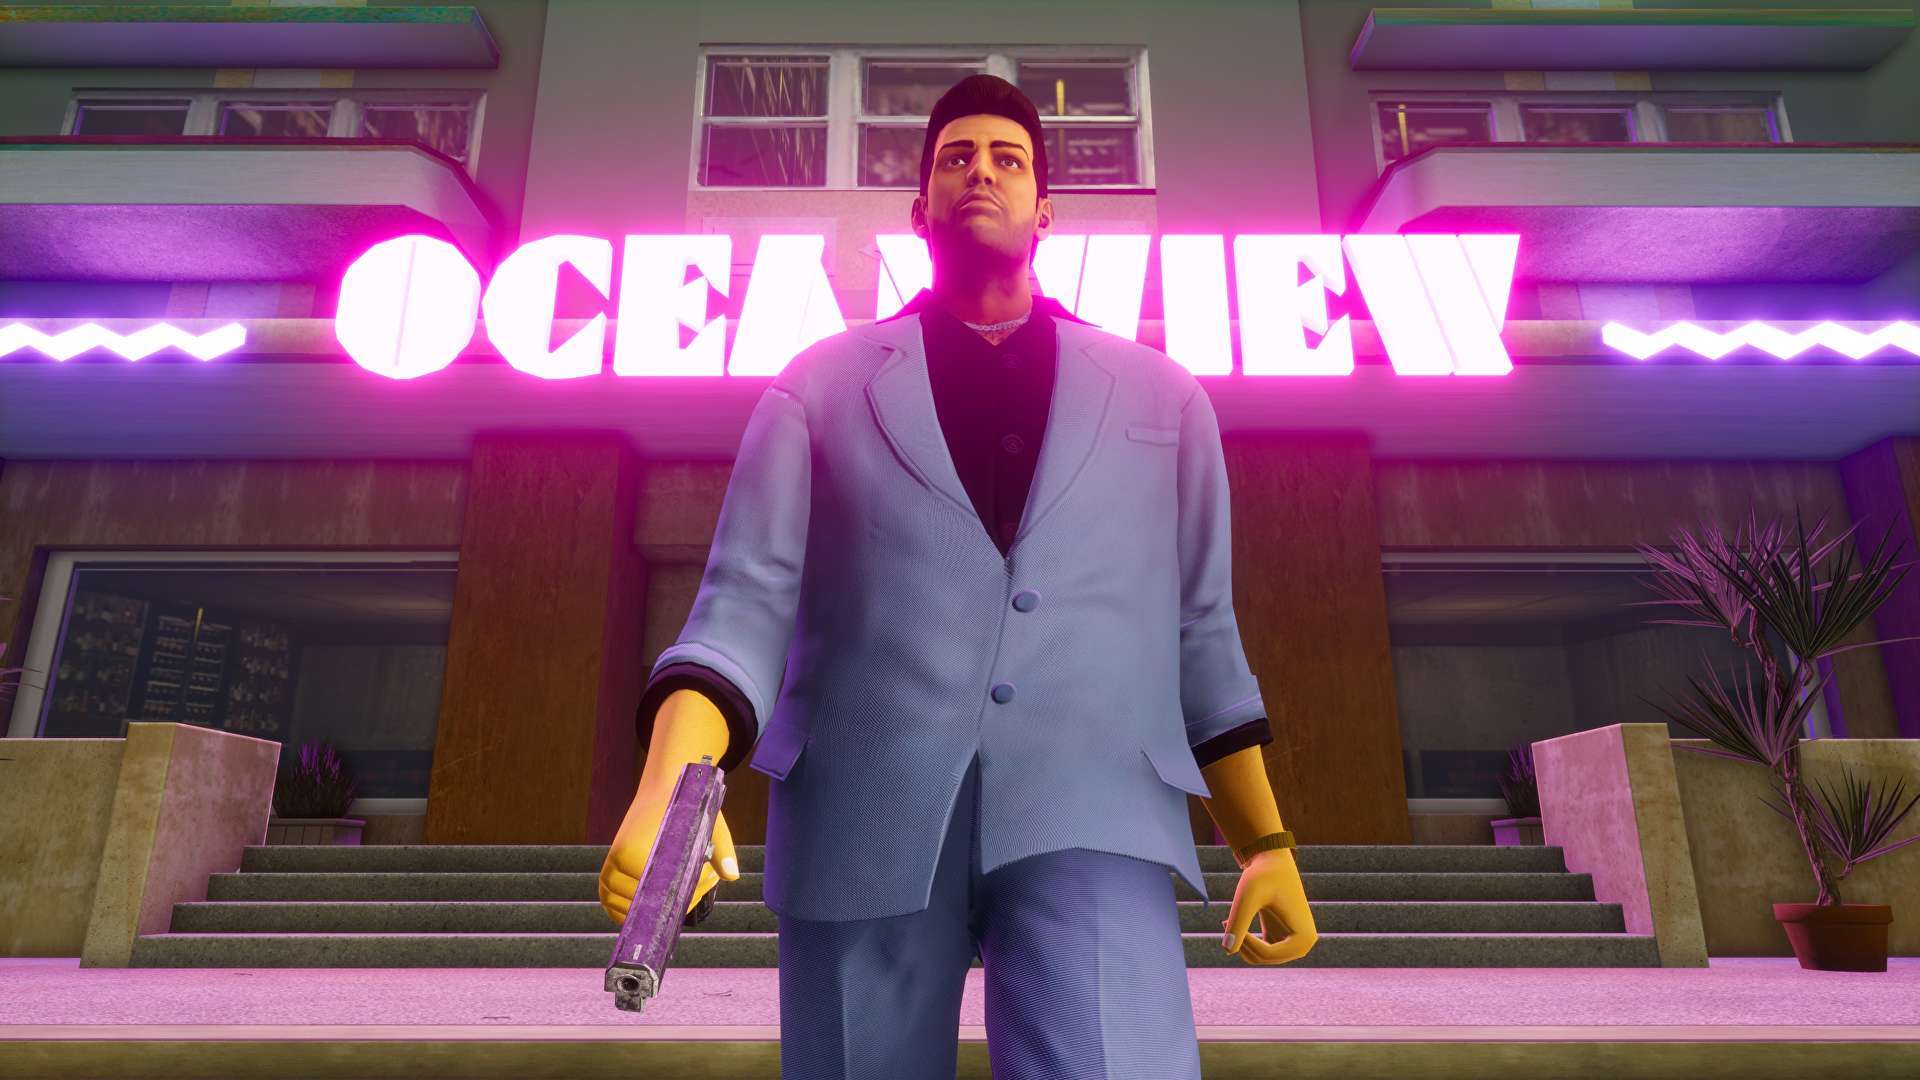 kern Geneeskunde nogmaals GTA Vice City Cheats for PC, PS4, PS5, Xbox One And Xbox Series X